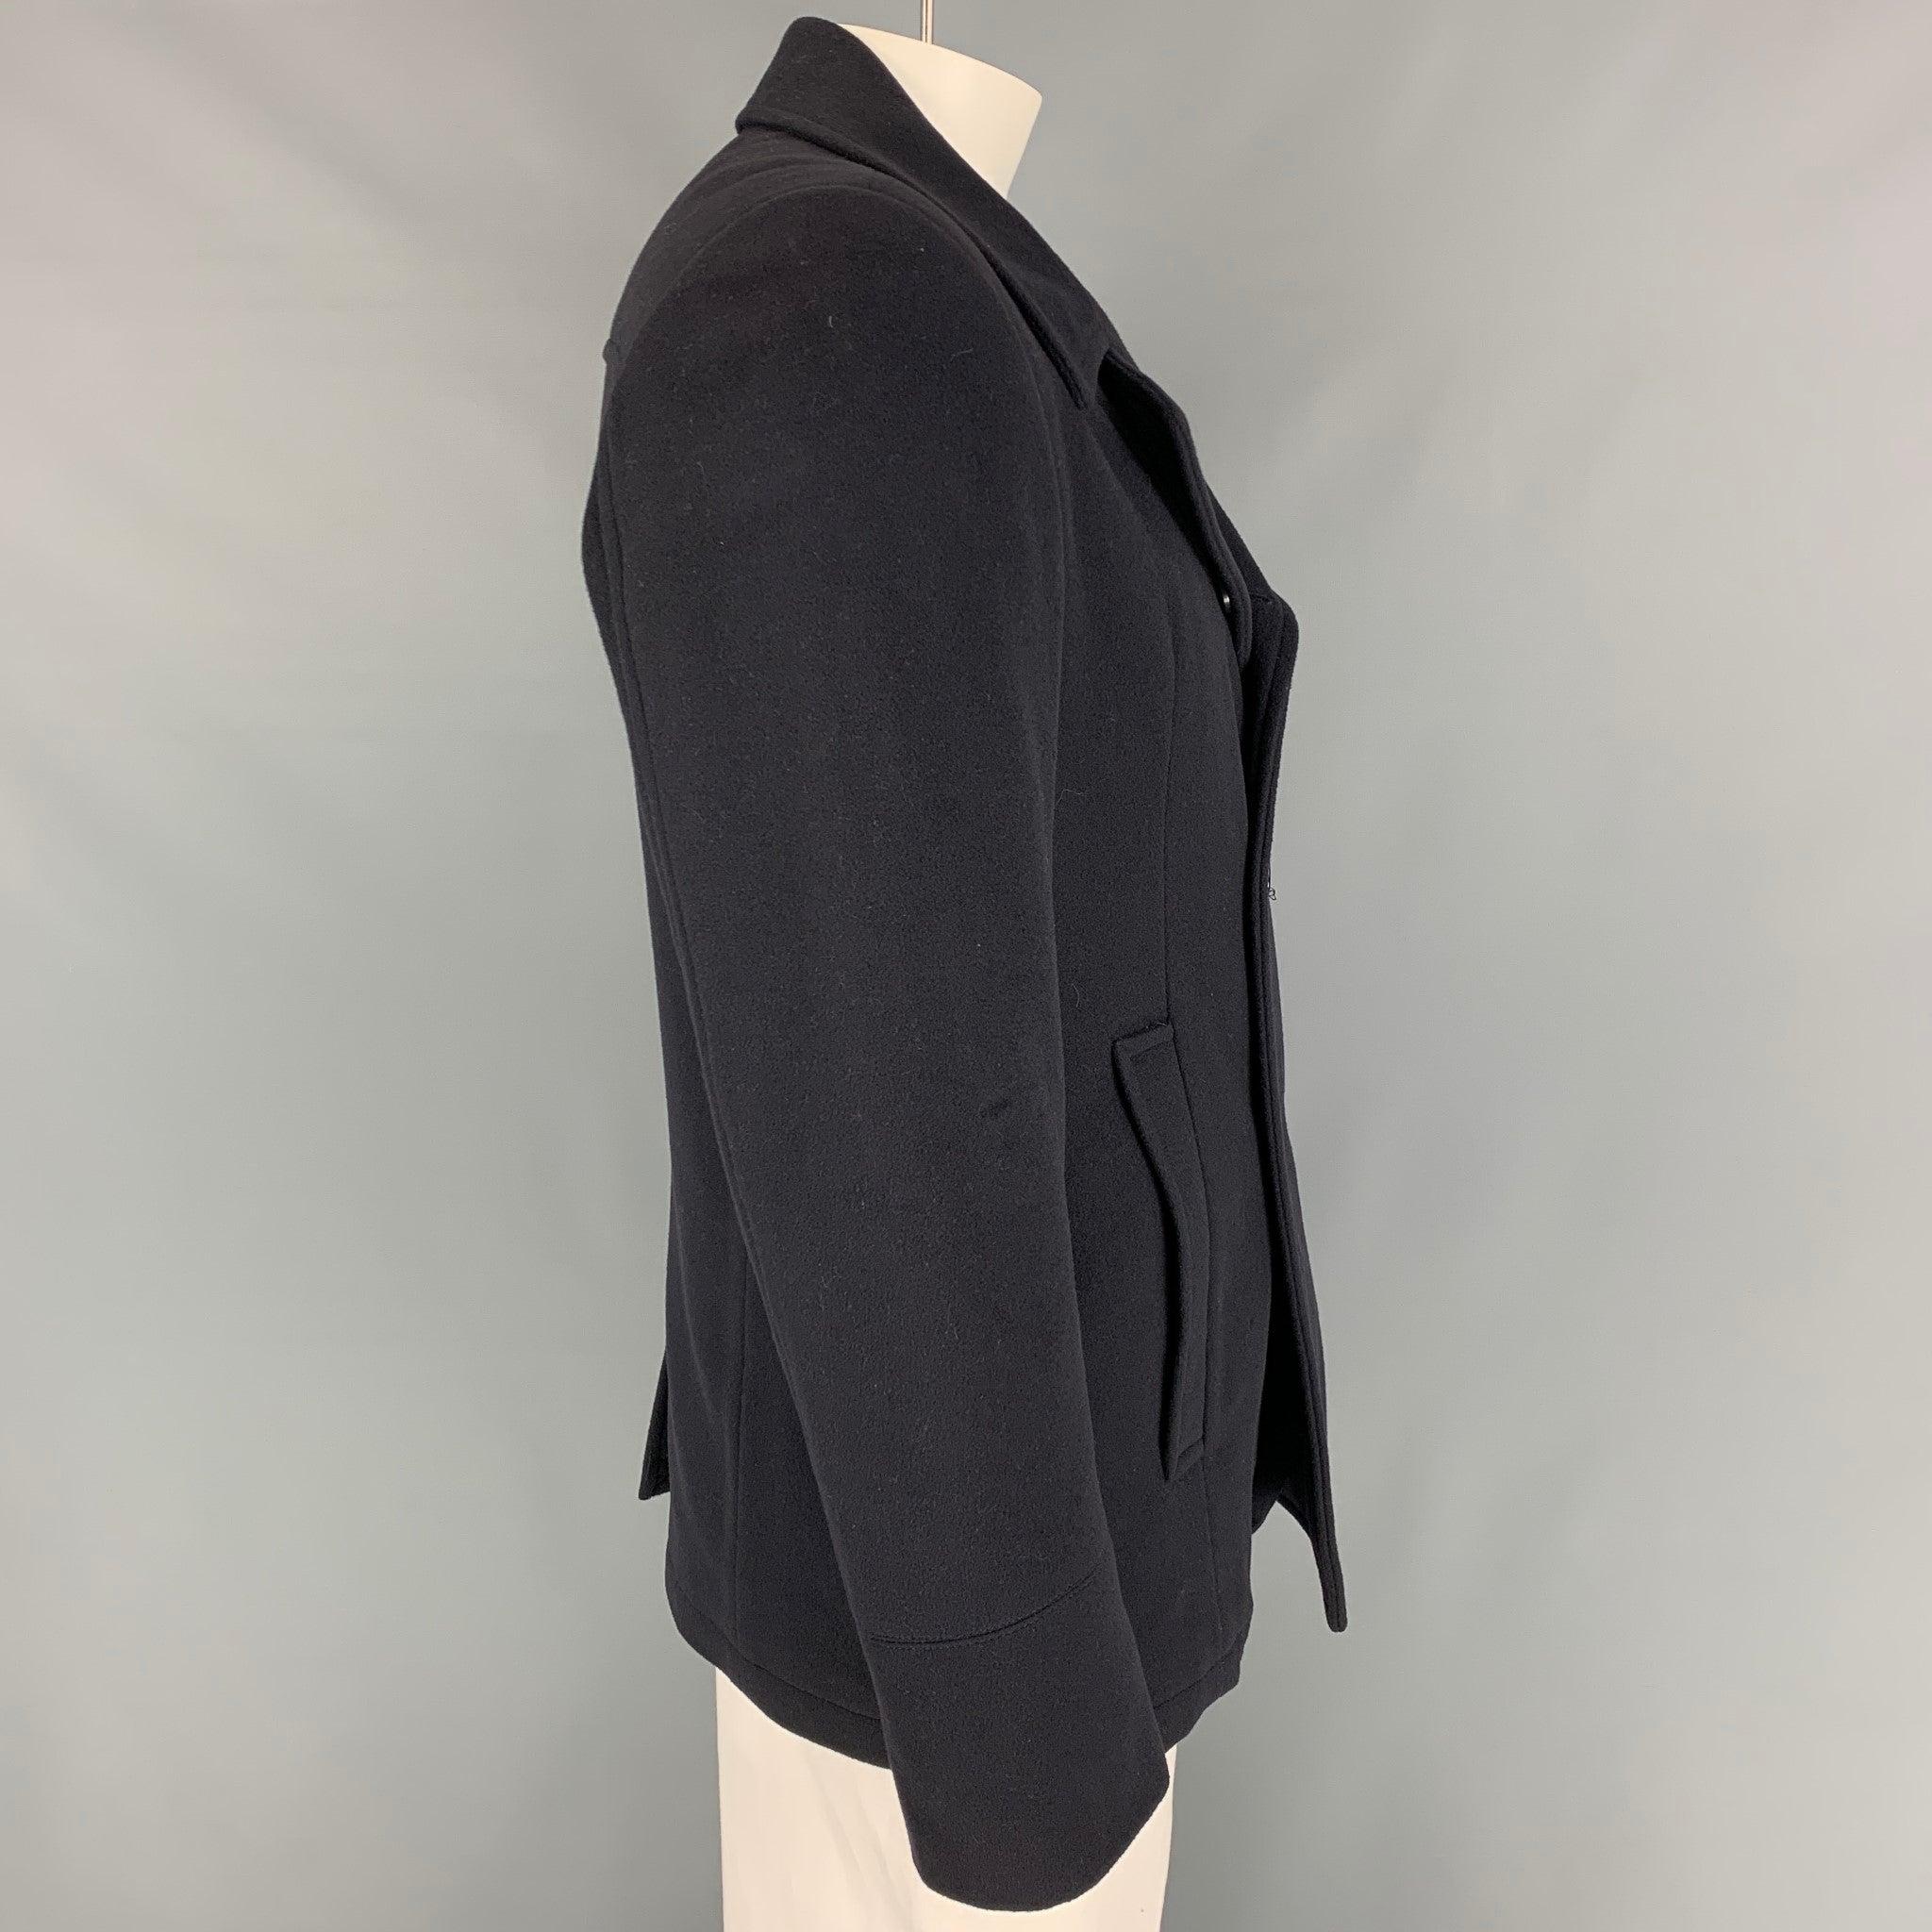 SAKS FIFTH AVENUE Size 42 Navy Cashmere Blend Double Breasted Peacoat In Good Condition For Sale In San Francisco, CA